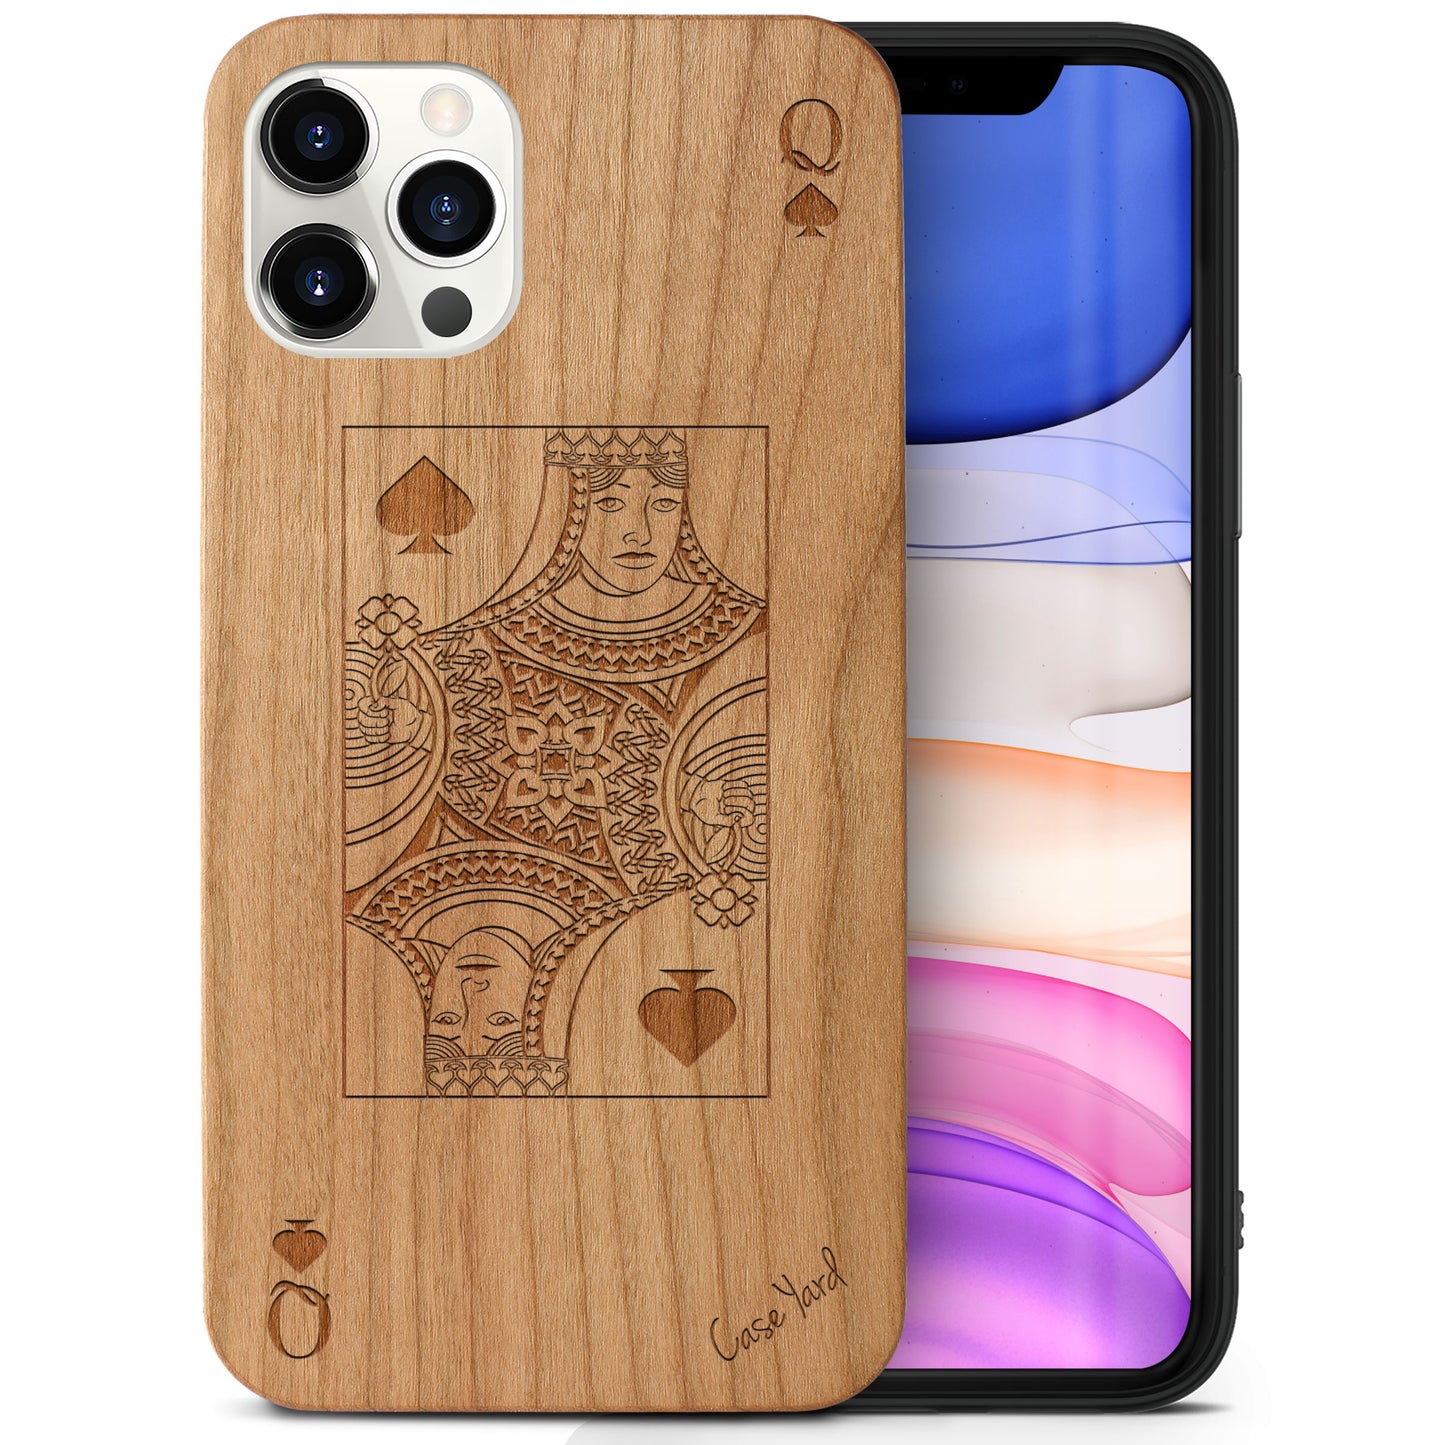 Wooden Cell Phone Case Cover, Laser Engraved case for iPhone & Samsung phone Queen of Spade Design